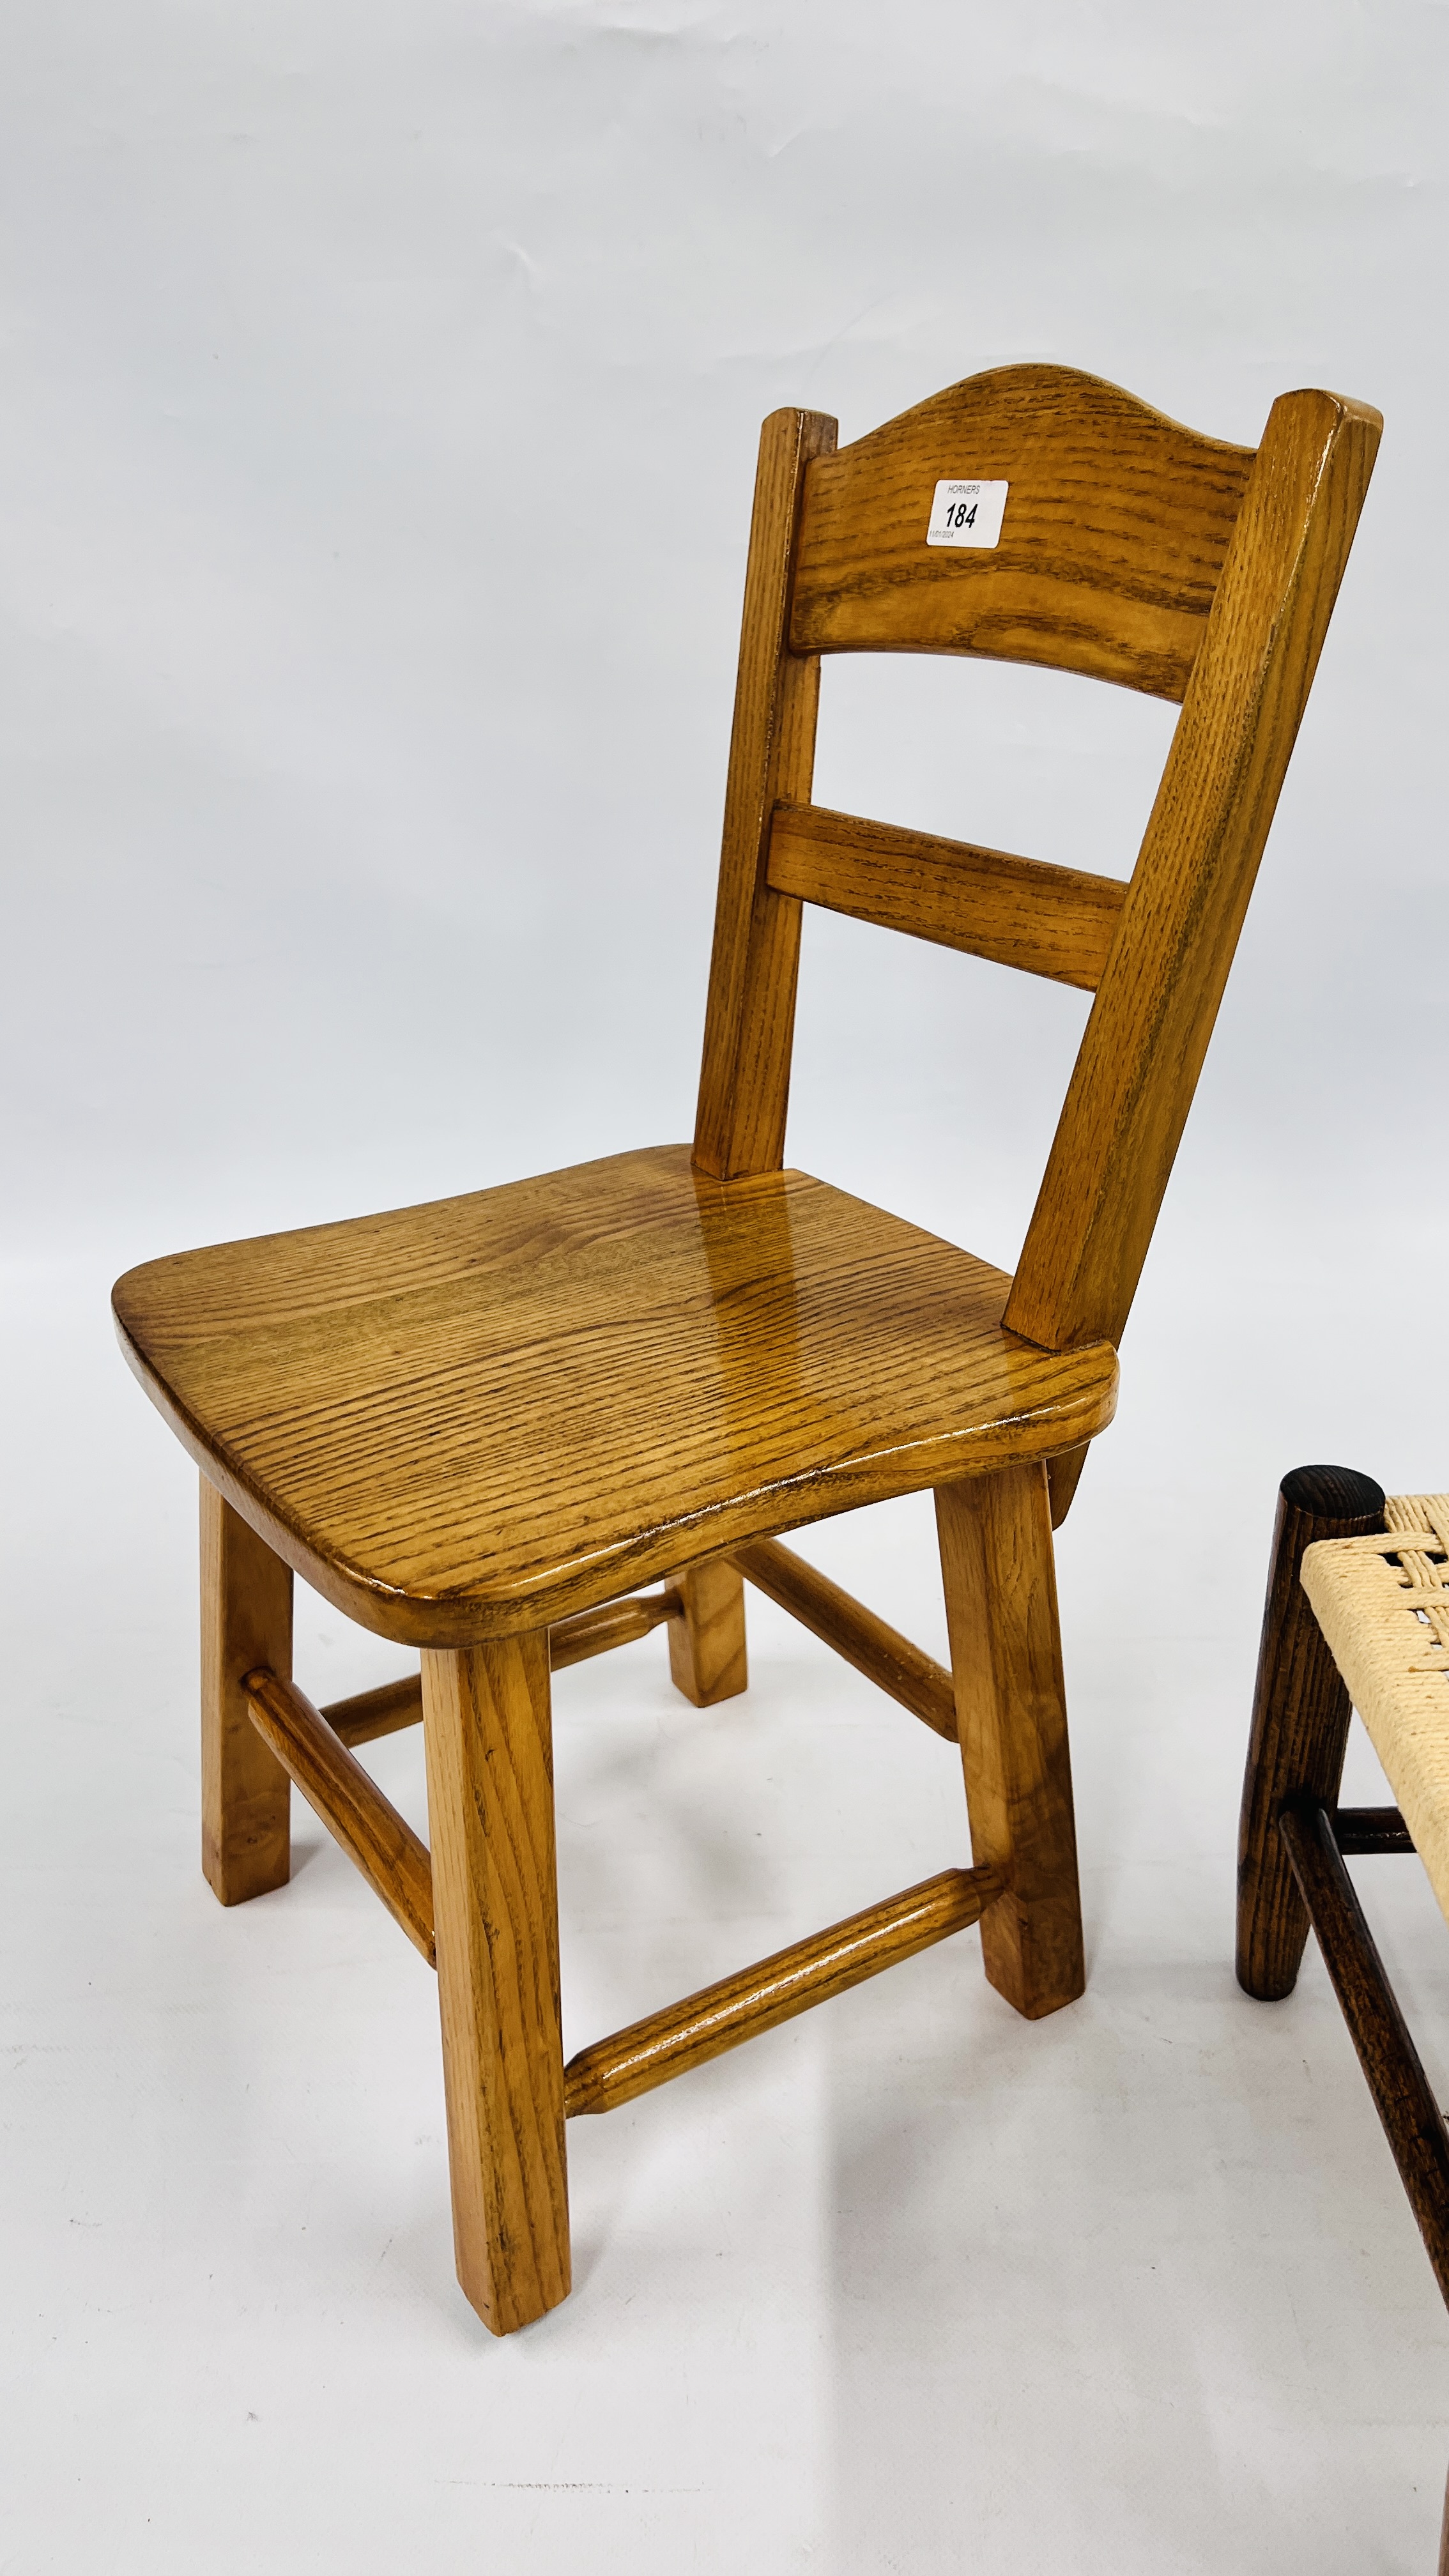 A HANDMADE SOLID OAK CHILD'S CHAIR AND SMALL OAK STOOL WITH WOVEN SEAT. - Image 6 of 9